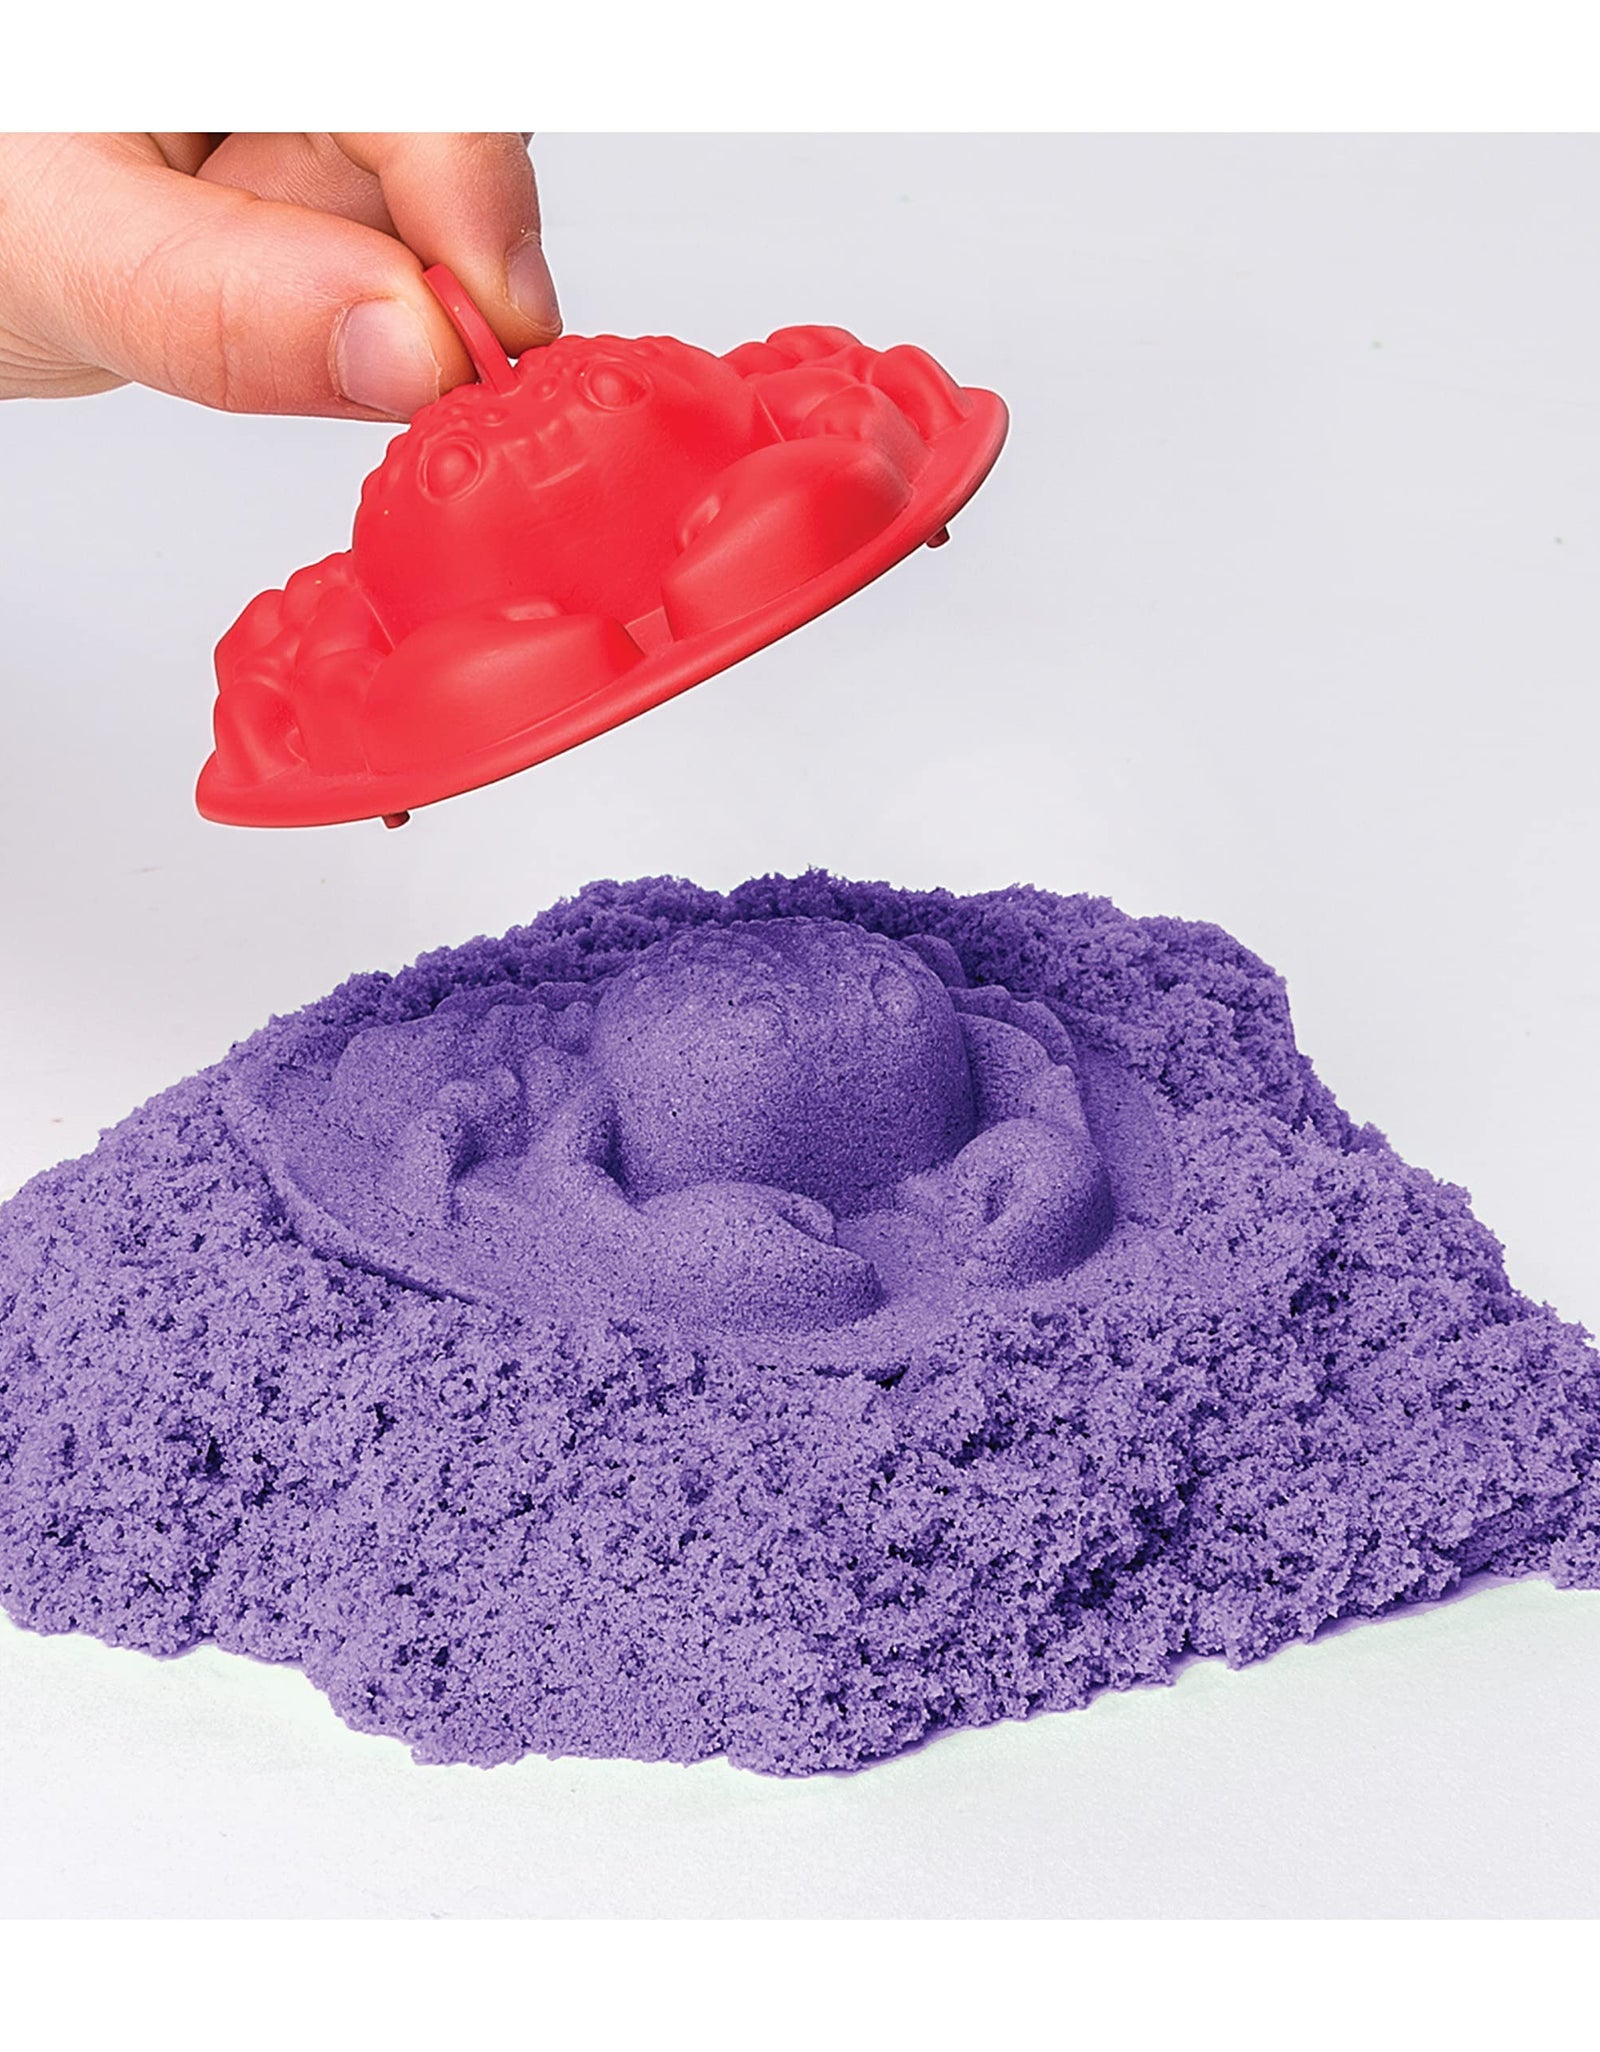 Kinetic Sand, Sandbox Playset with 1lb of Purple and 3 Molds, for Ages 3 and up